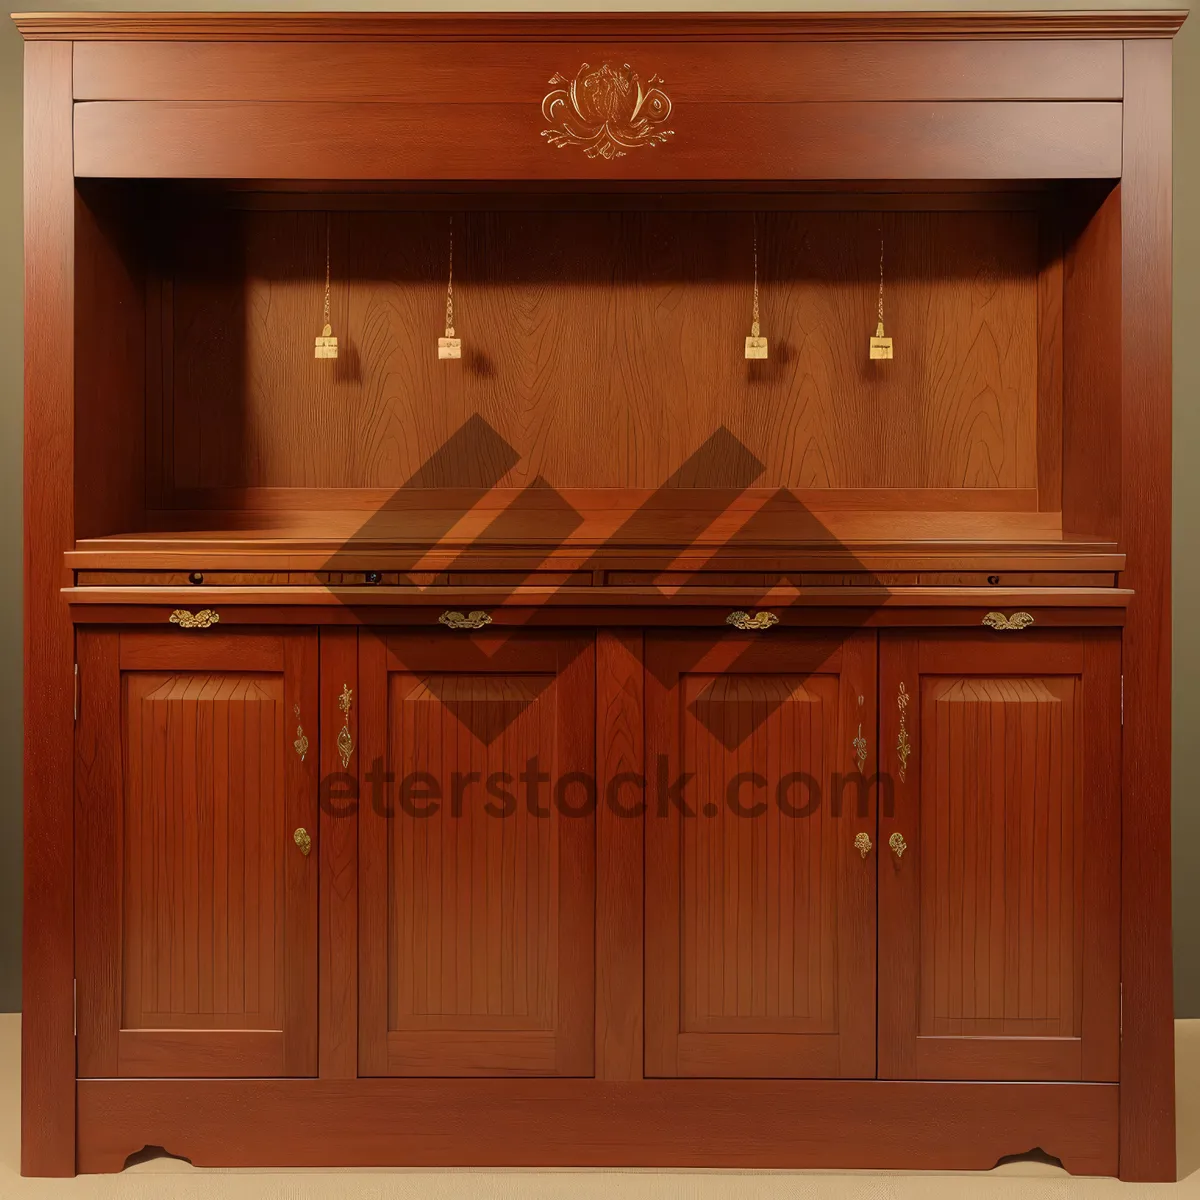 Picture of Modern Luxury Kitchen Cabinet with Wood Buffet